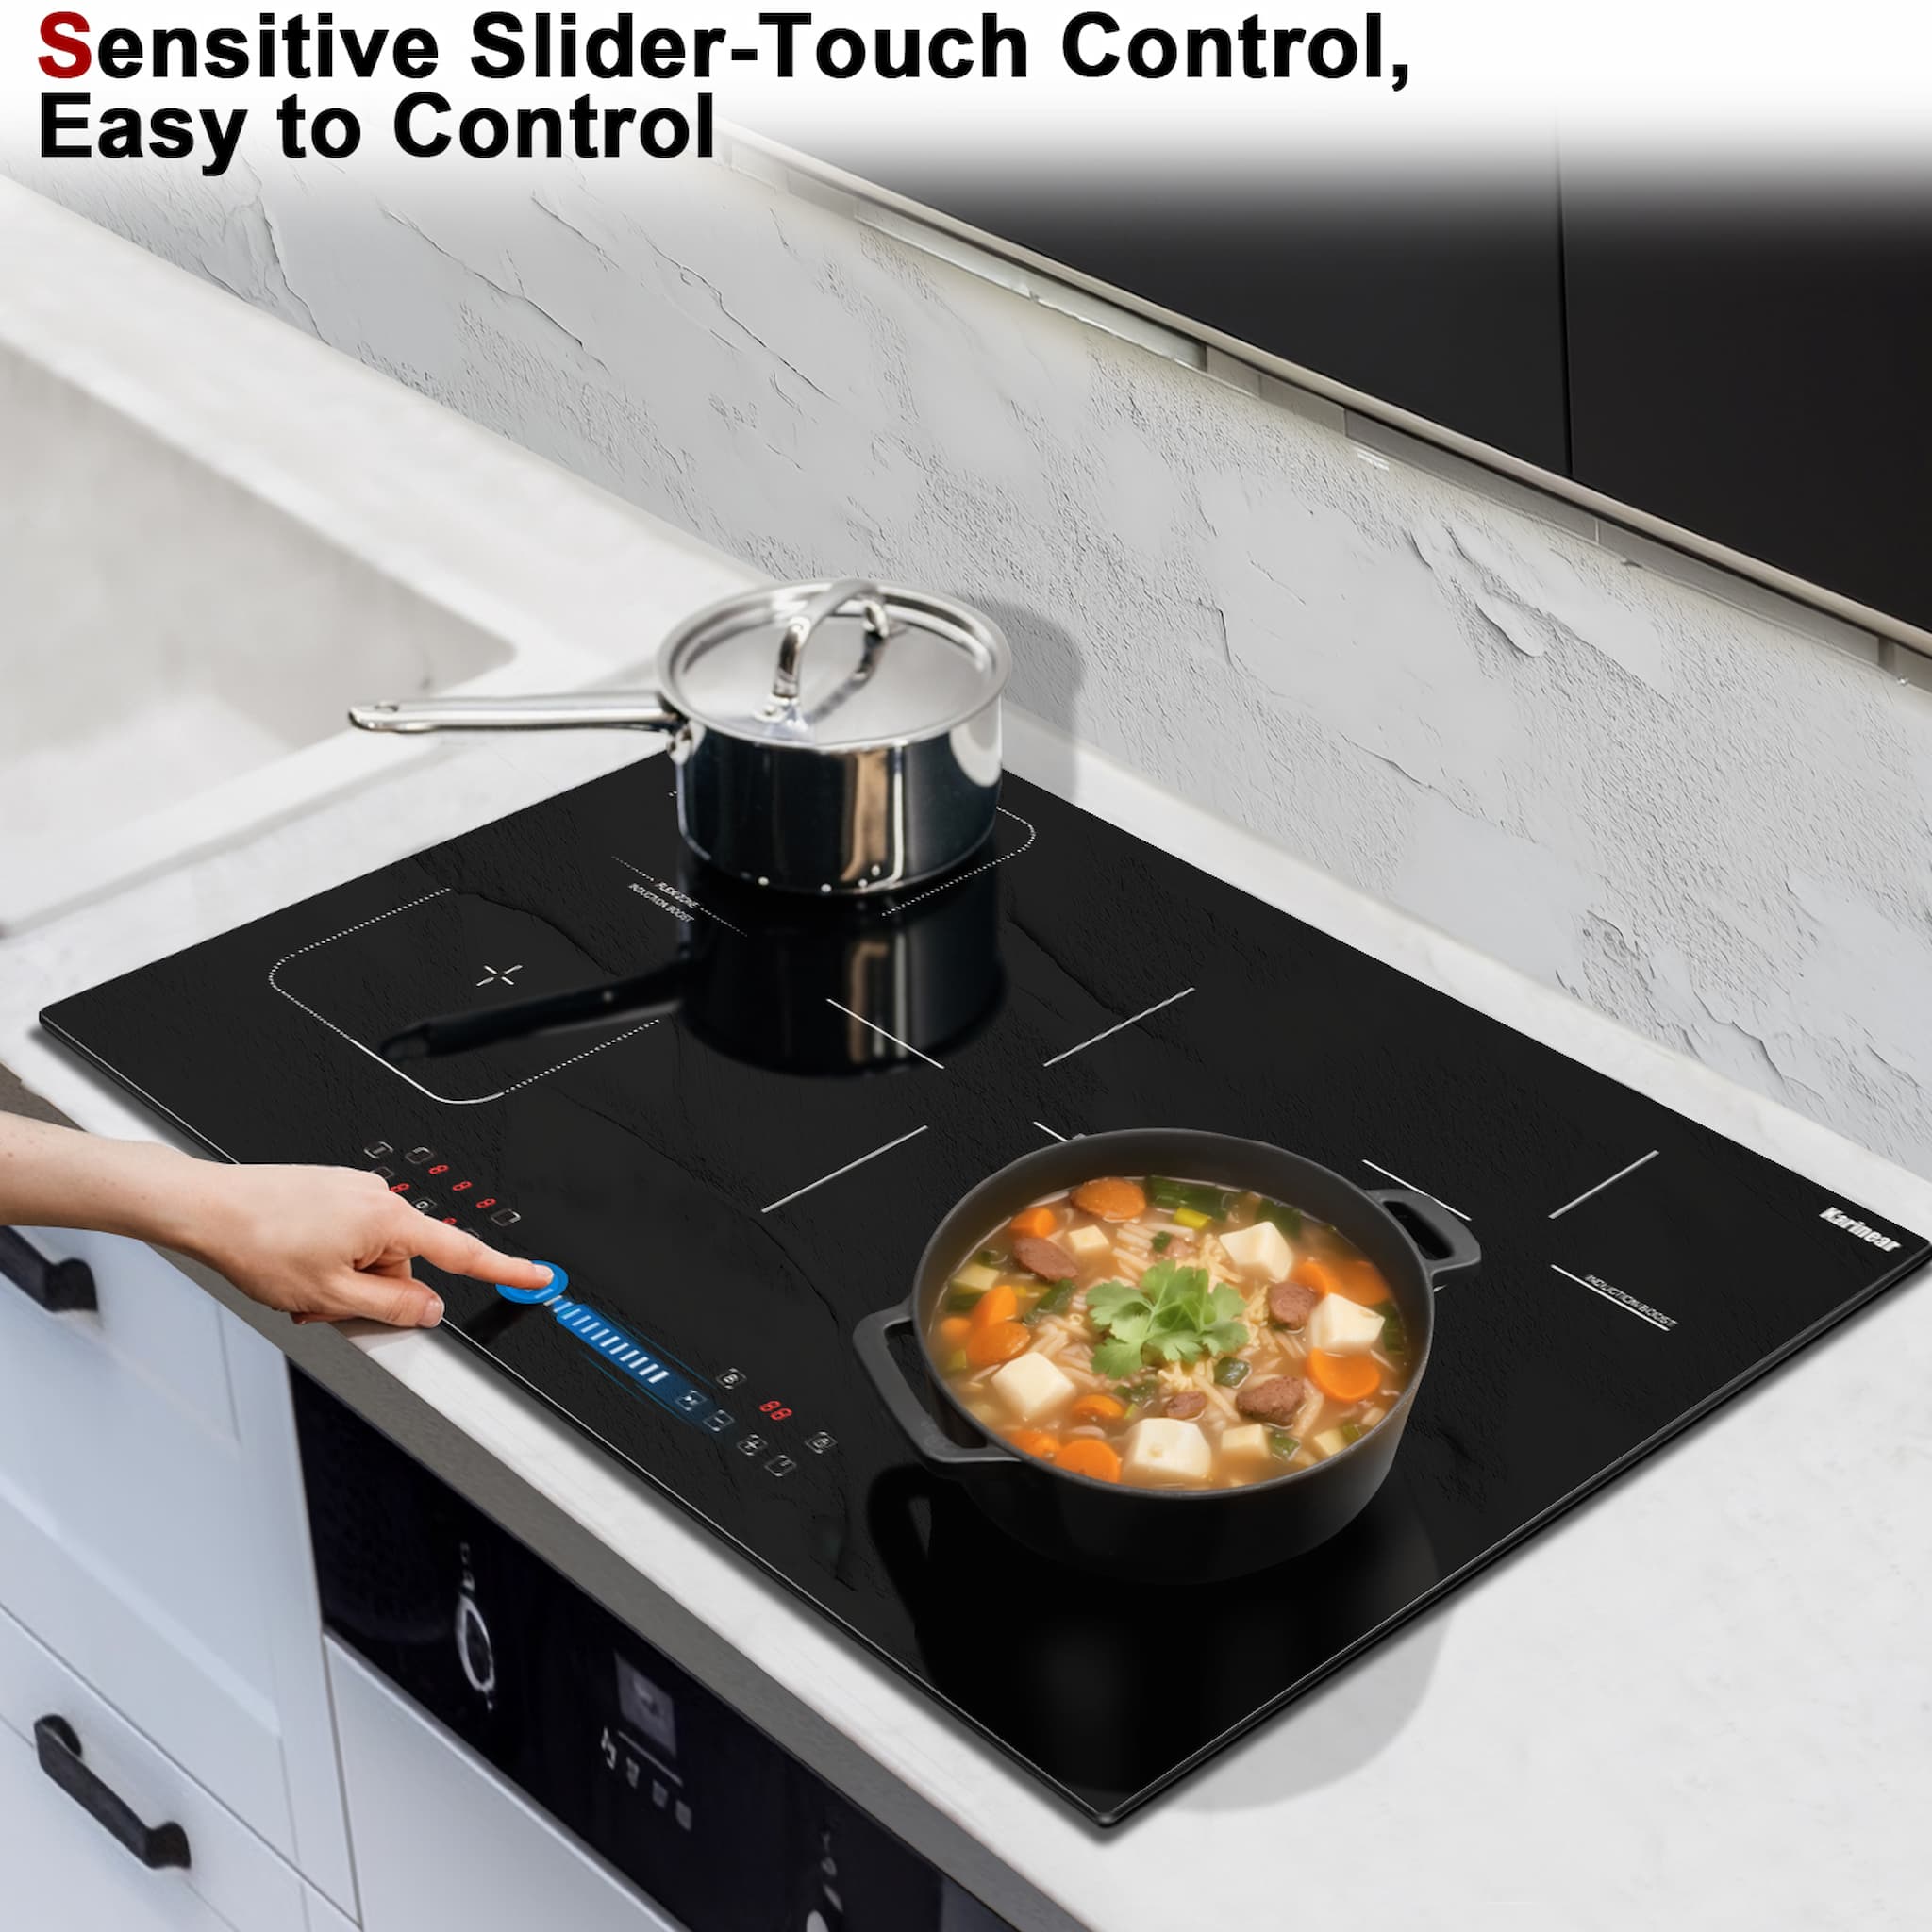 Your safety is important to us, and to ensure this, our stoves incorporate child locks, anti-overheating devices, and other safety safeguards so you can enjoy cooking with peace of mind!